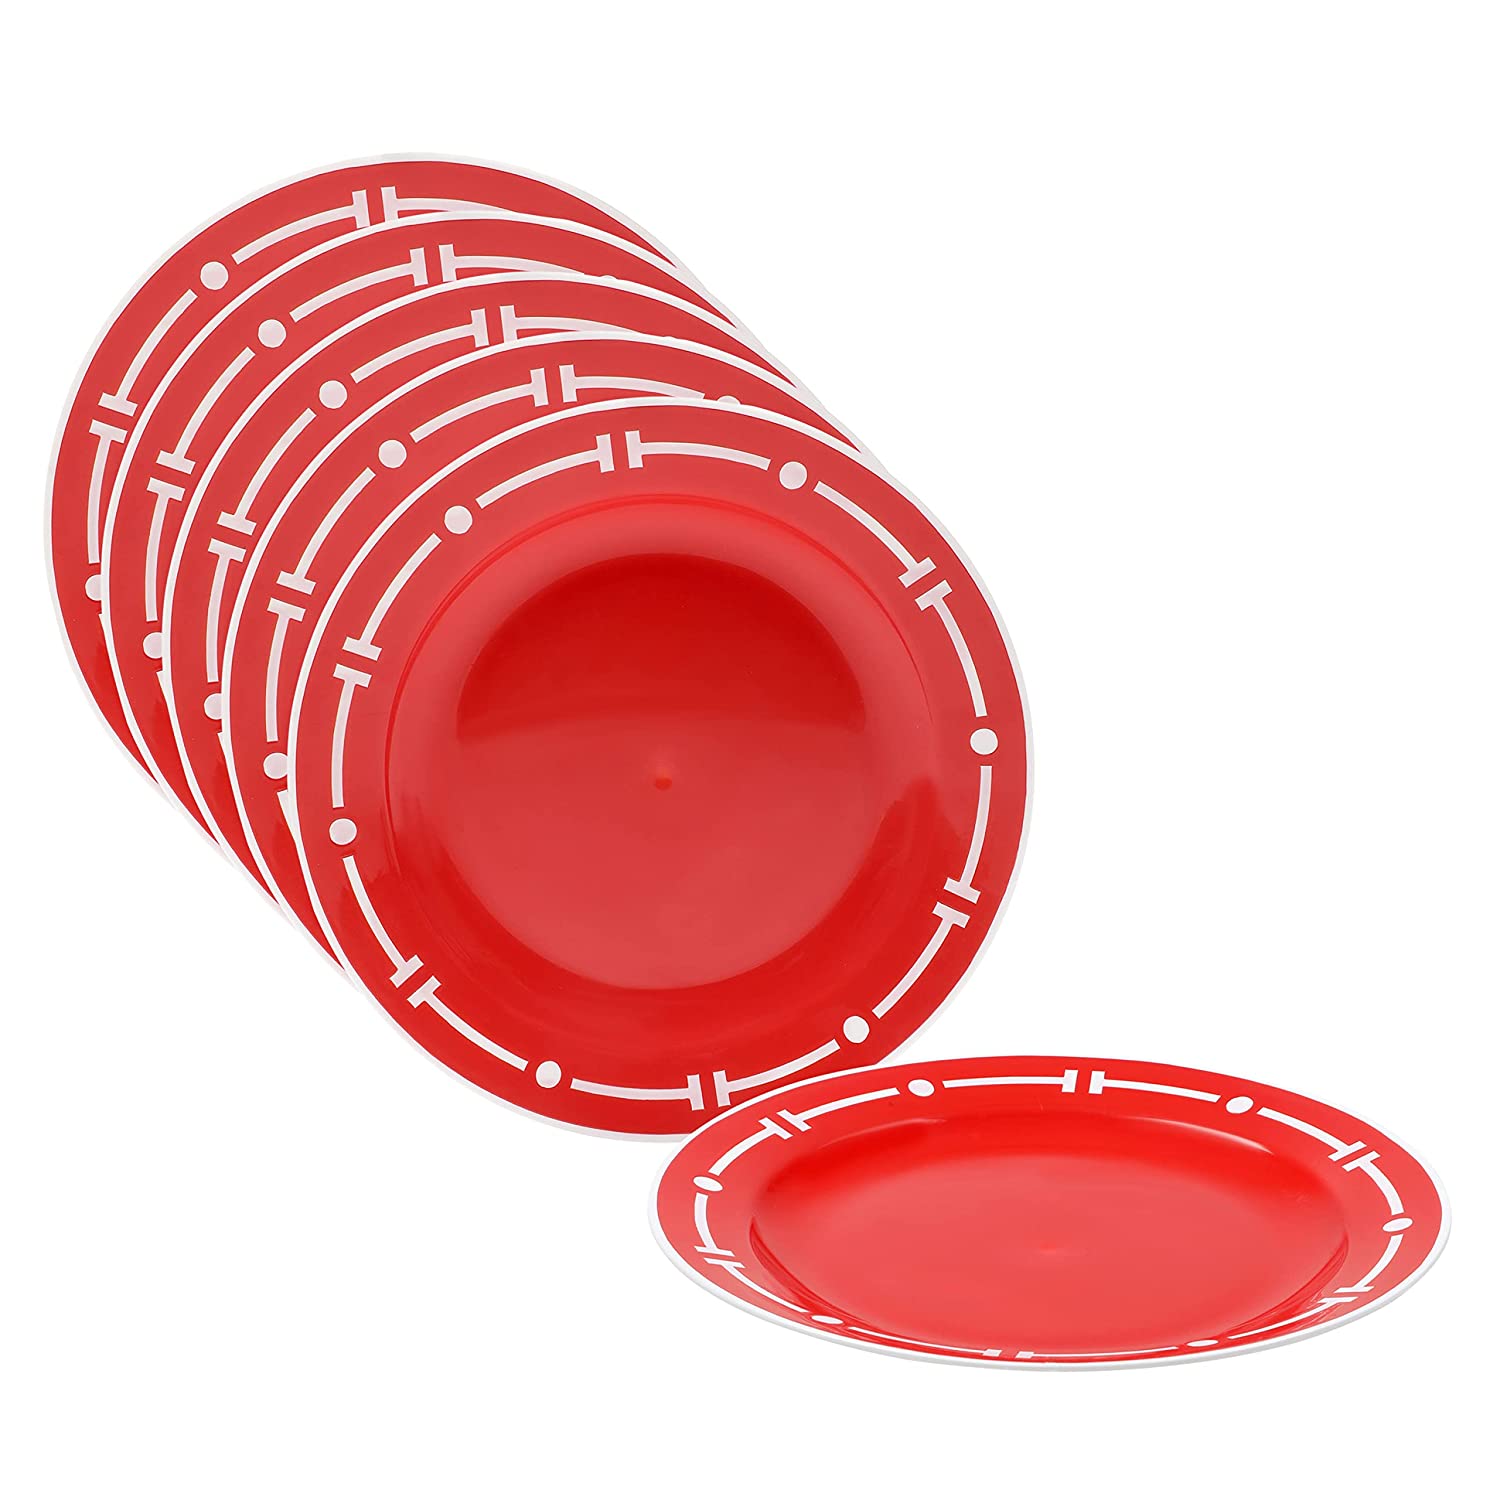 Cutting EDGE Round Double Colour Dinner Plates ,Unbreakable / Lightweight / Reusable / Dishwasher Safe / Lunch/Dinner/Bhojan/Thali Plates for Families, Kids Special, Daily Use & Parties, Regular Design Plates